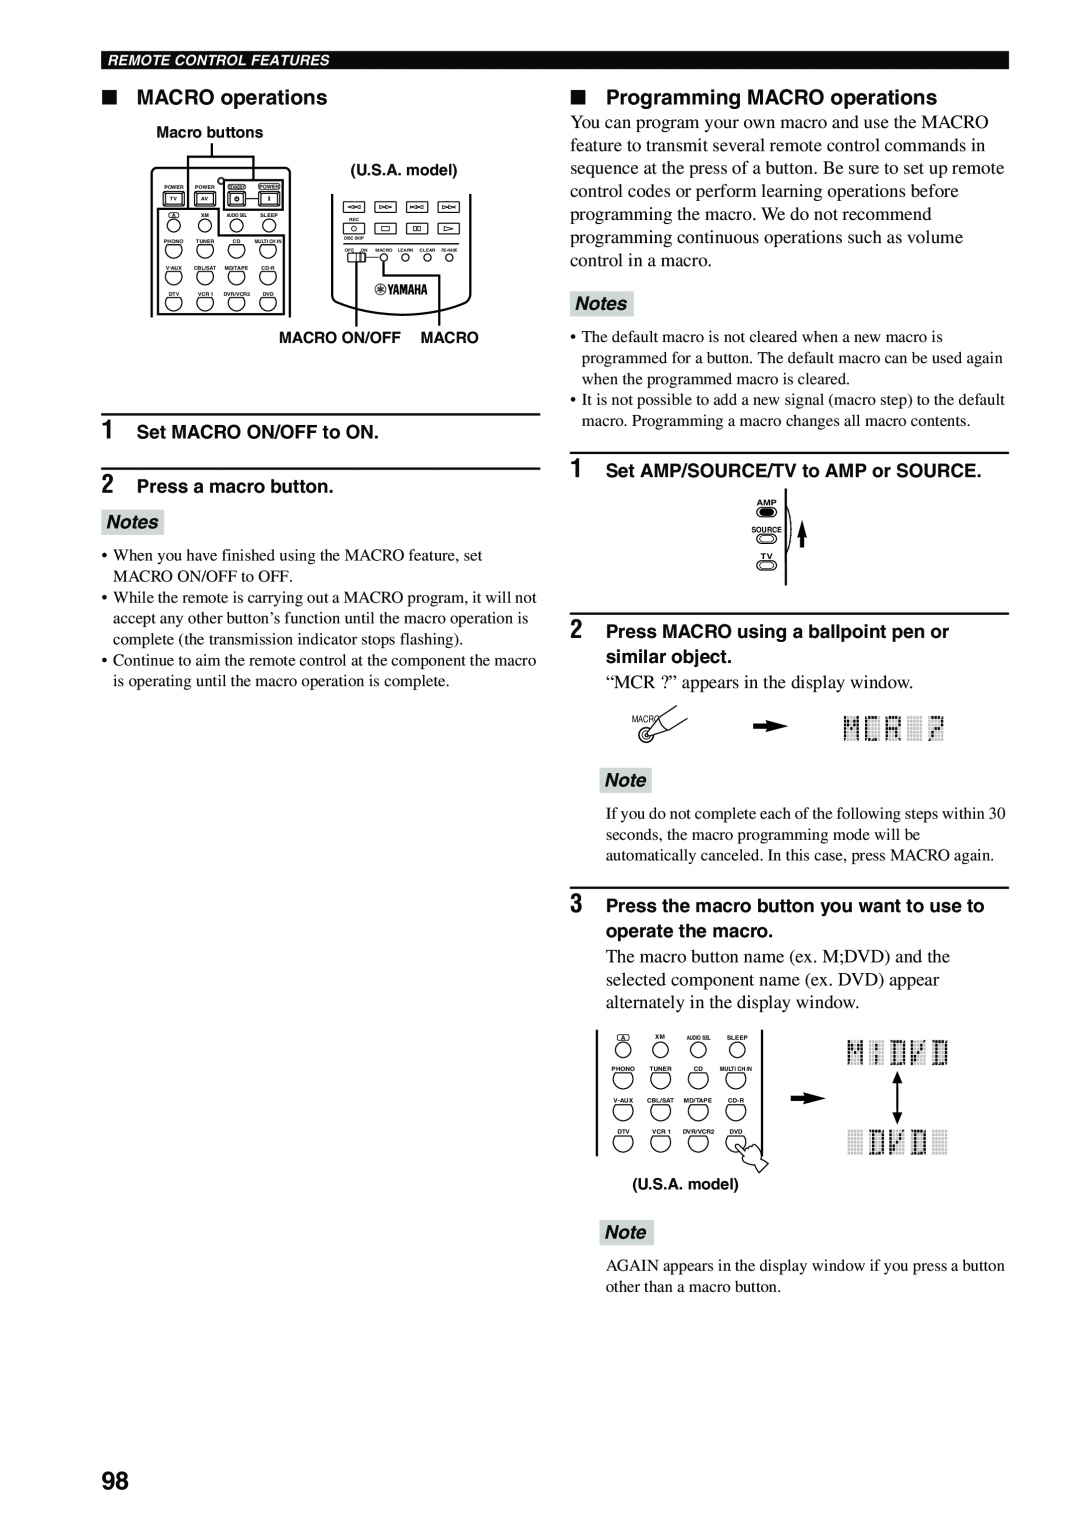 Yamaha HTR-5990 owner manual Programming MACRO operations, 1Set MACRO ON/OFF to ON 2Press a macro button, Notes 